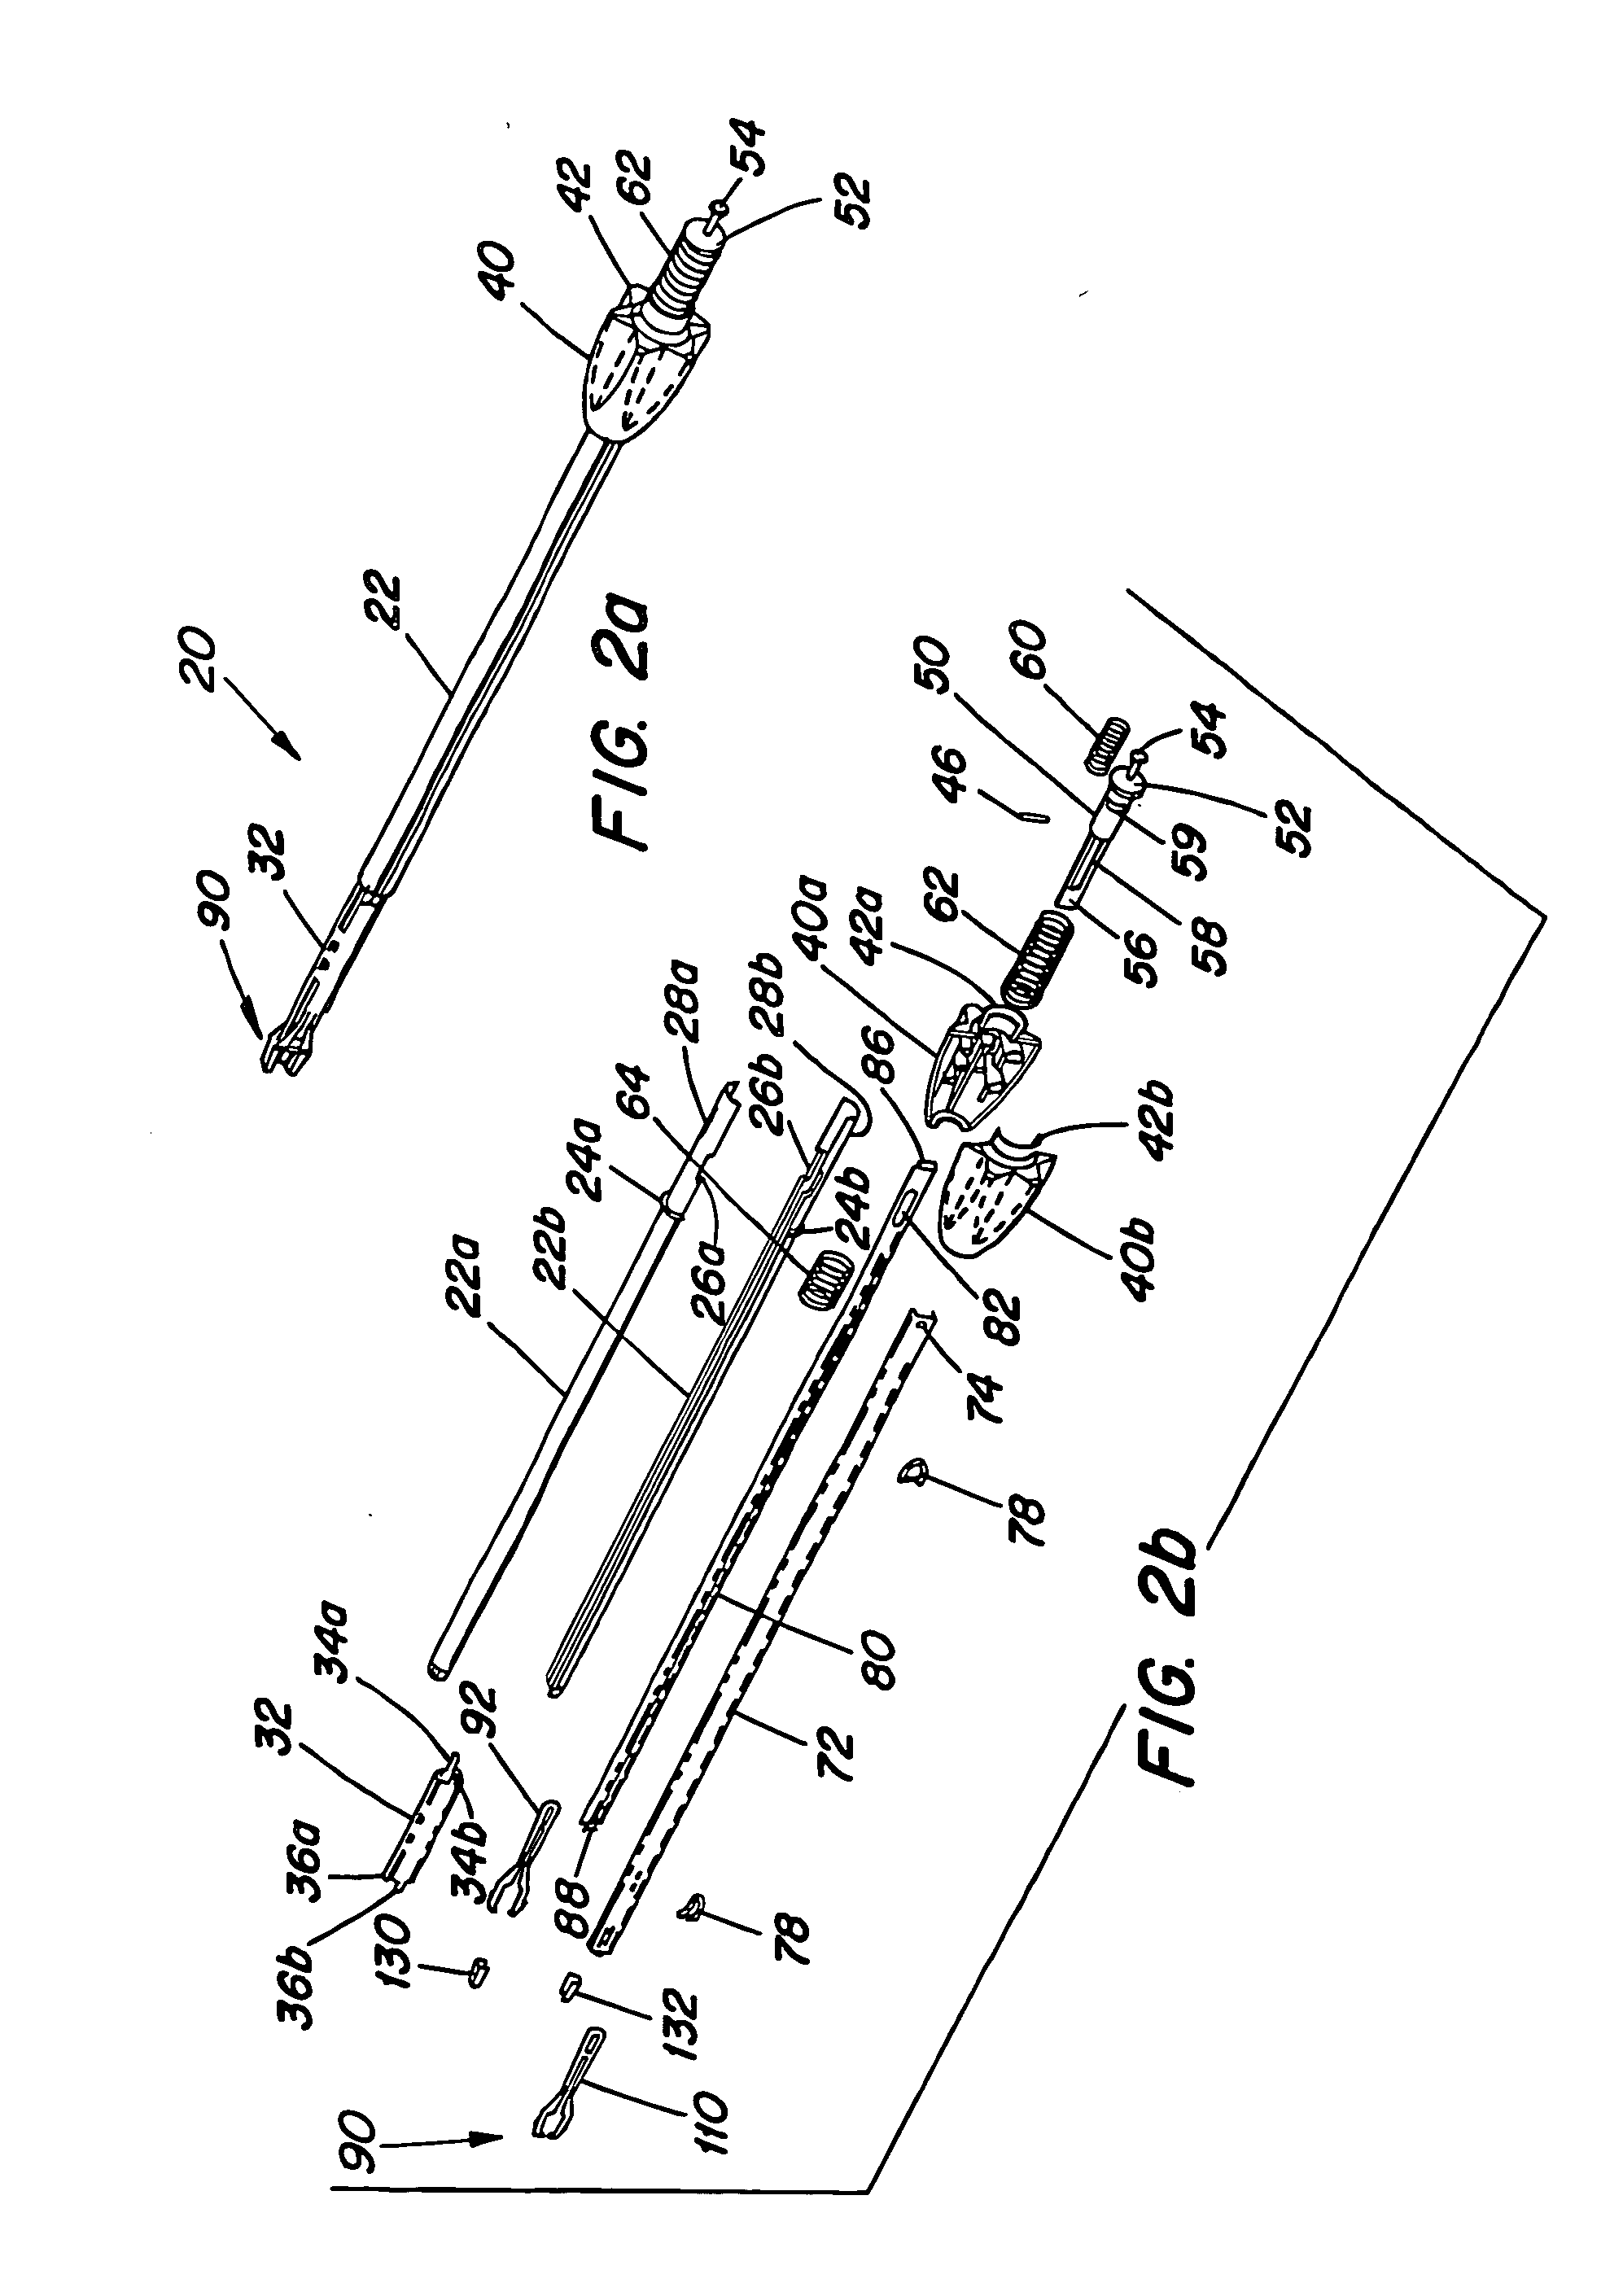 Endoscopic clip applying apparatus with improved aperture for clip release and related method